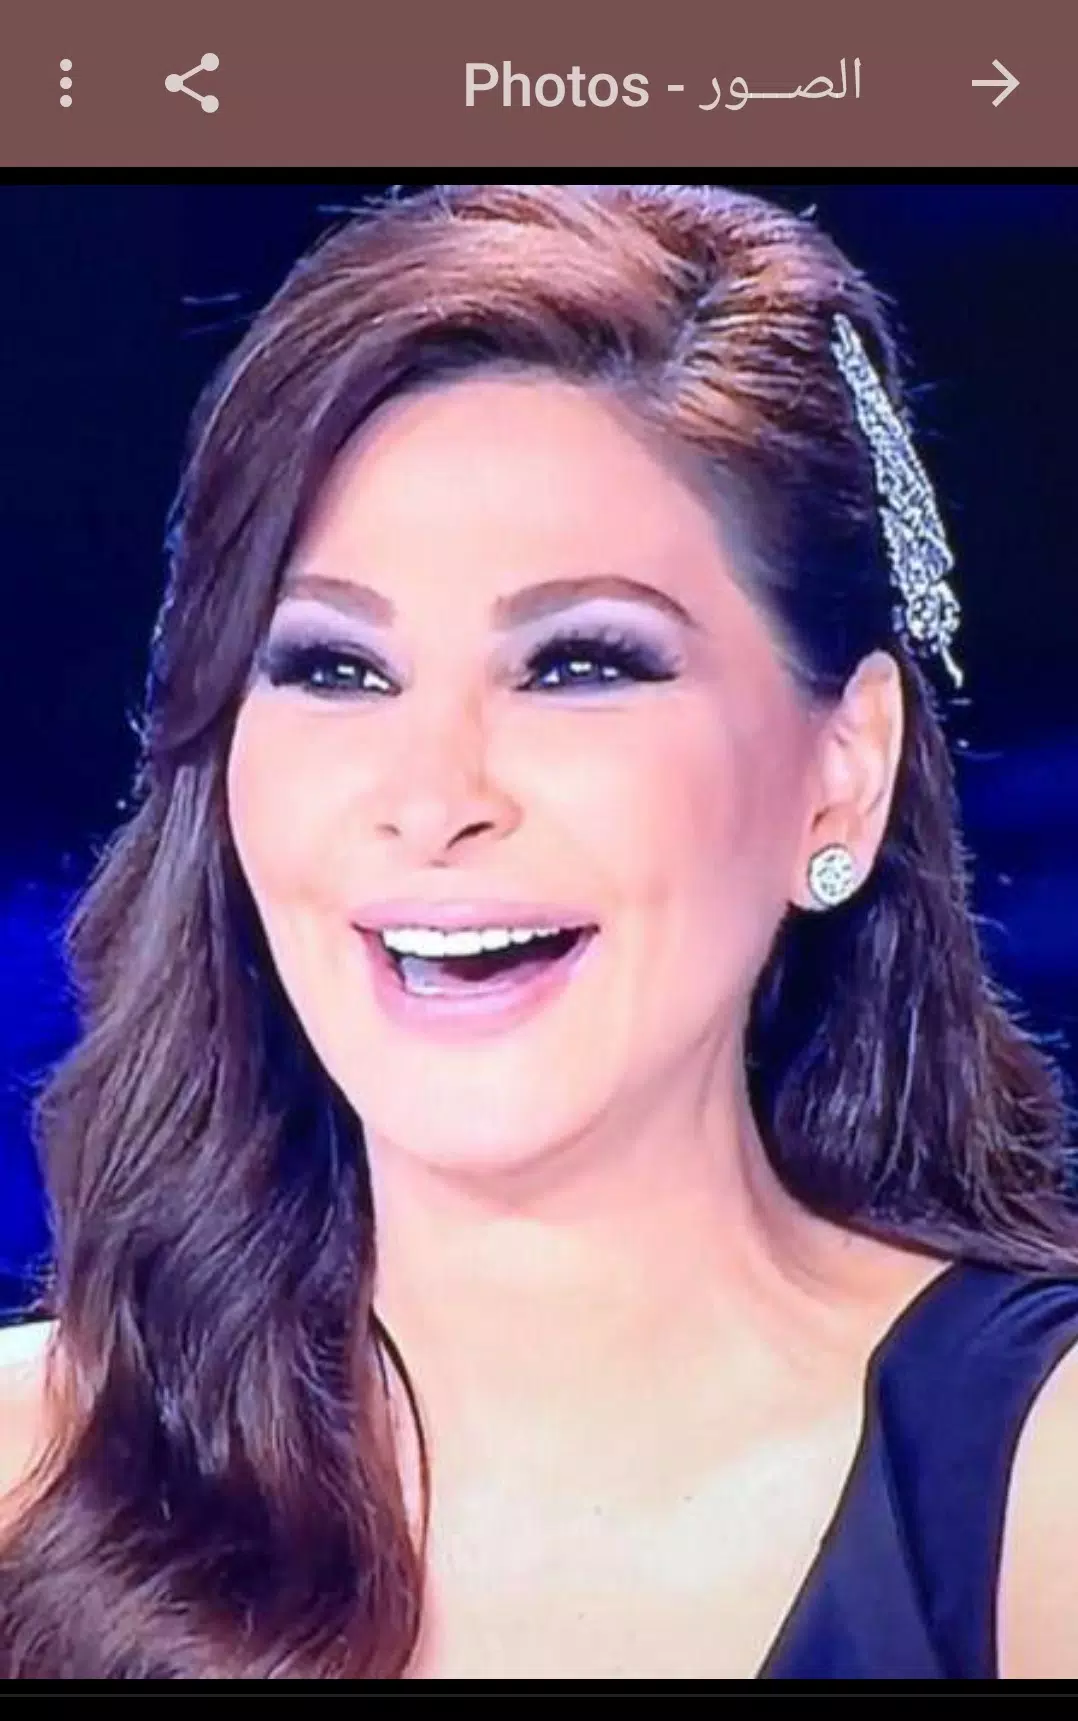 Elissa Songs 2020 APK for Android Download